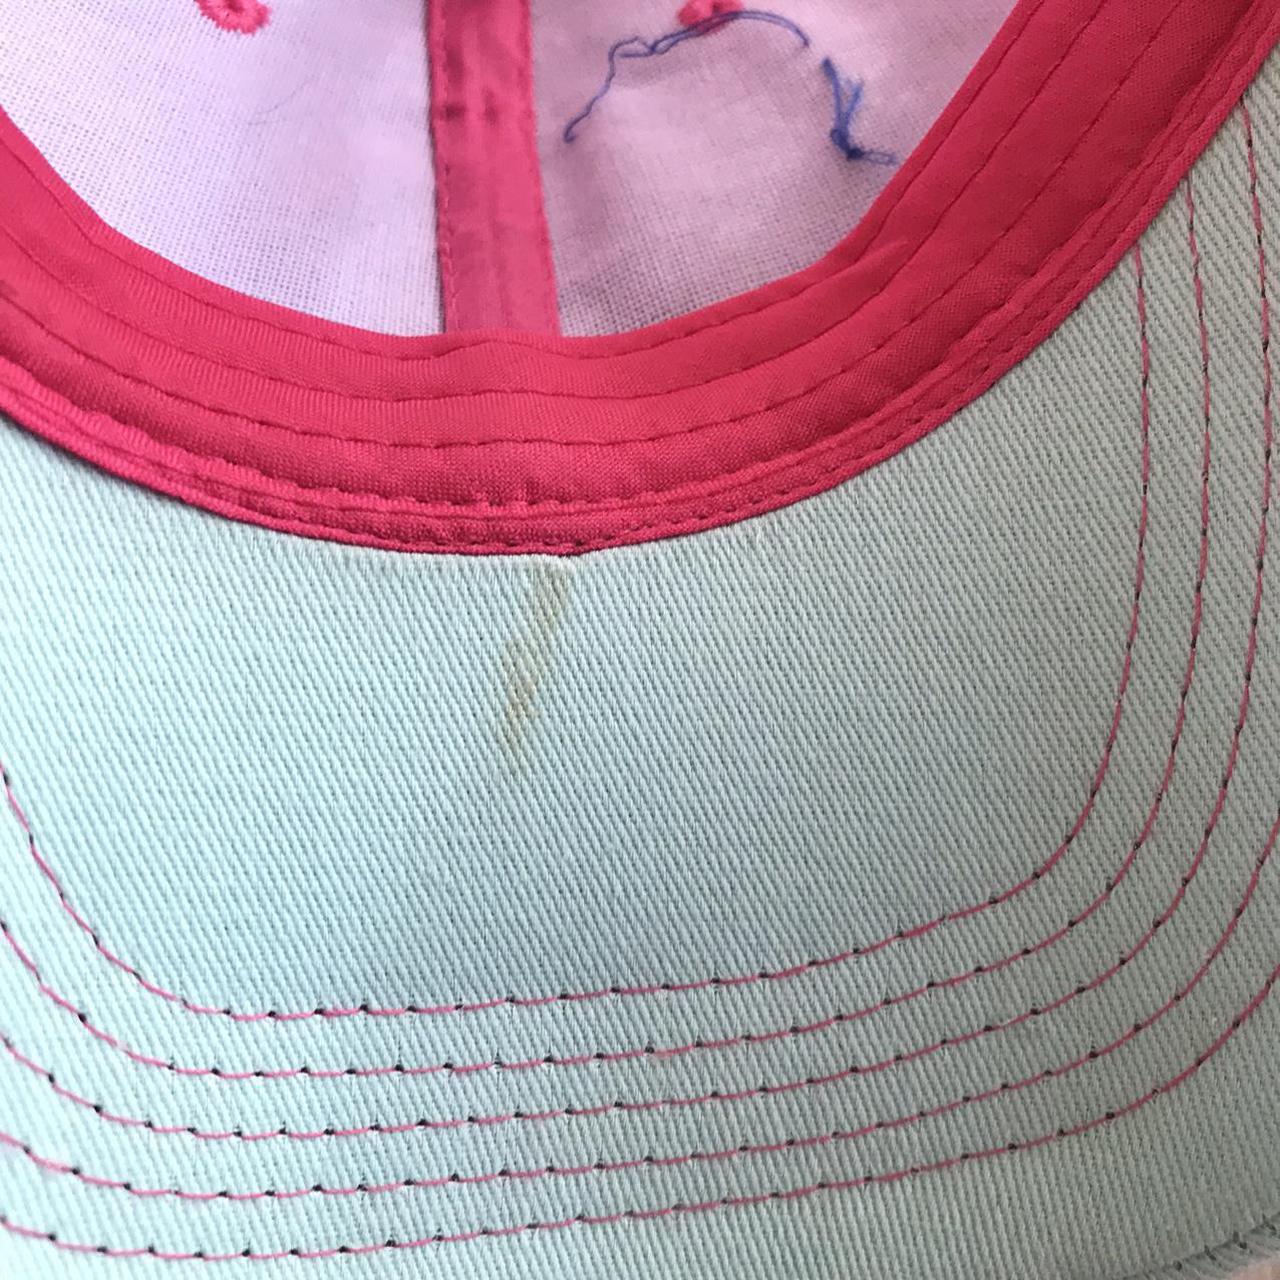 Men's Blue and Pink Hat (3)